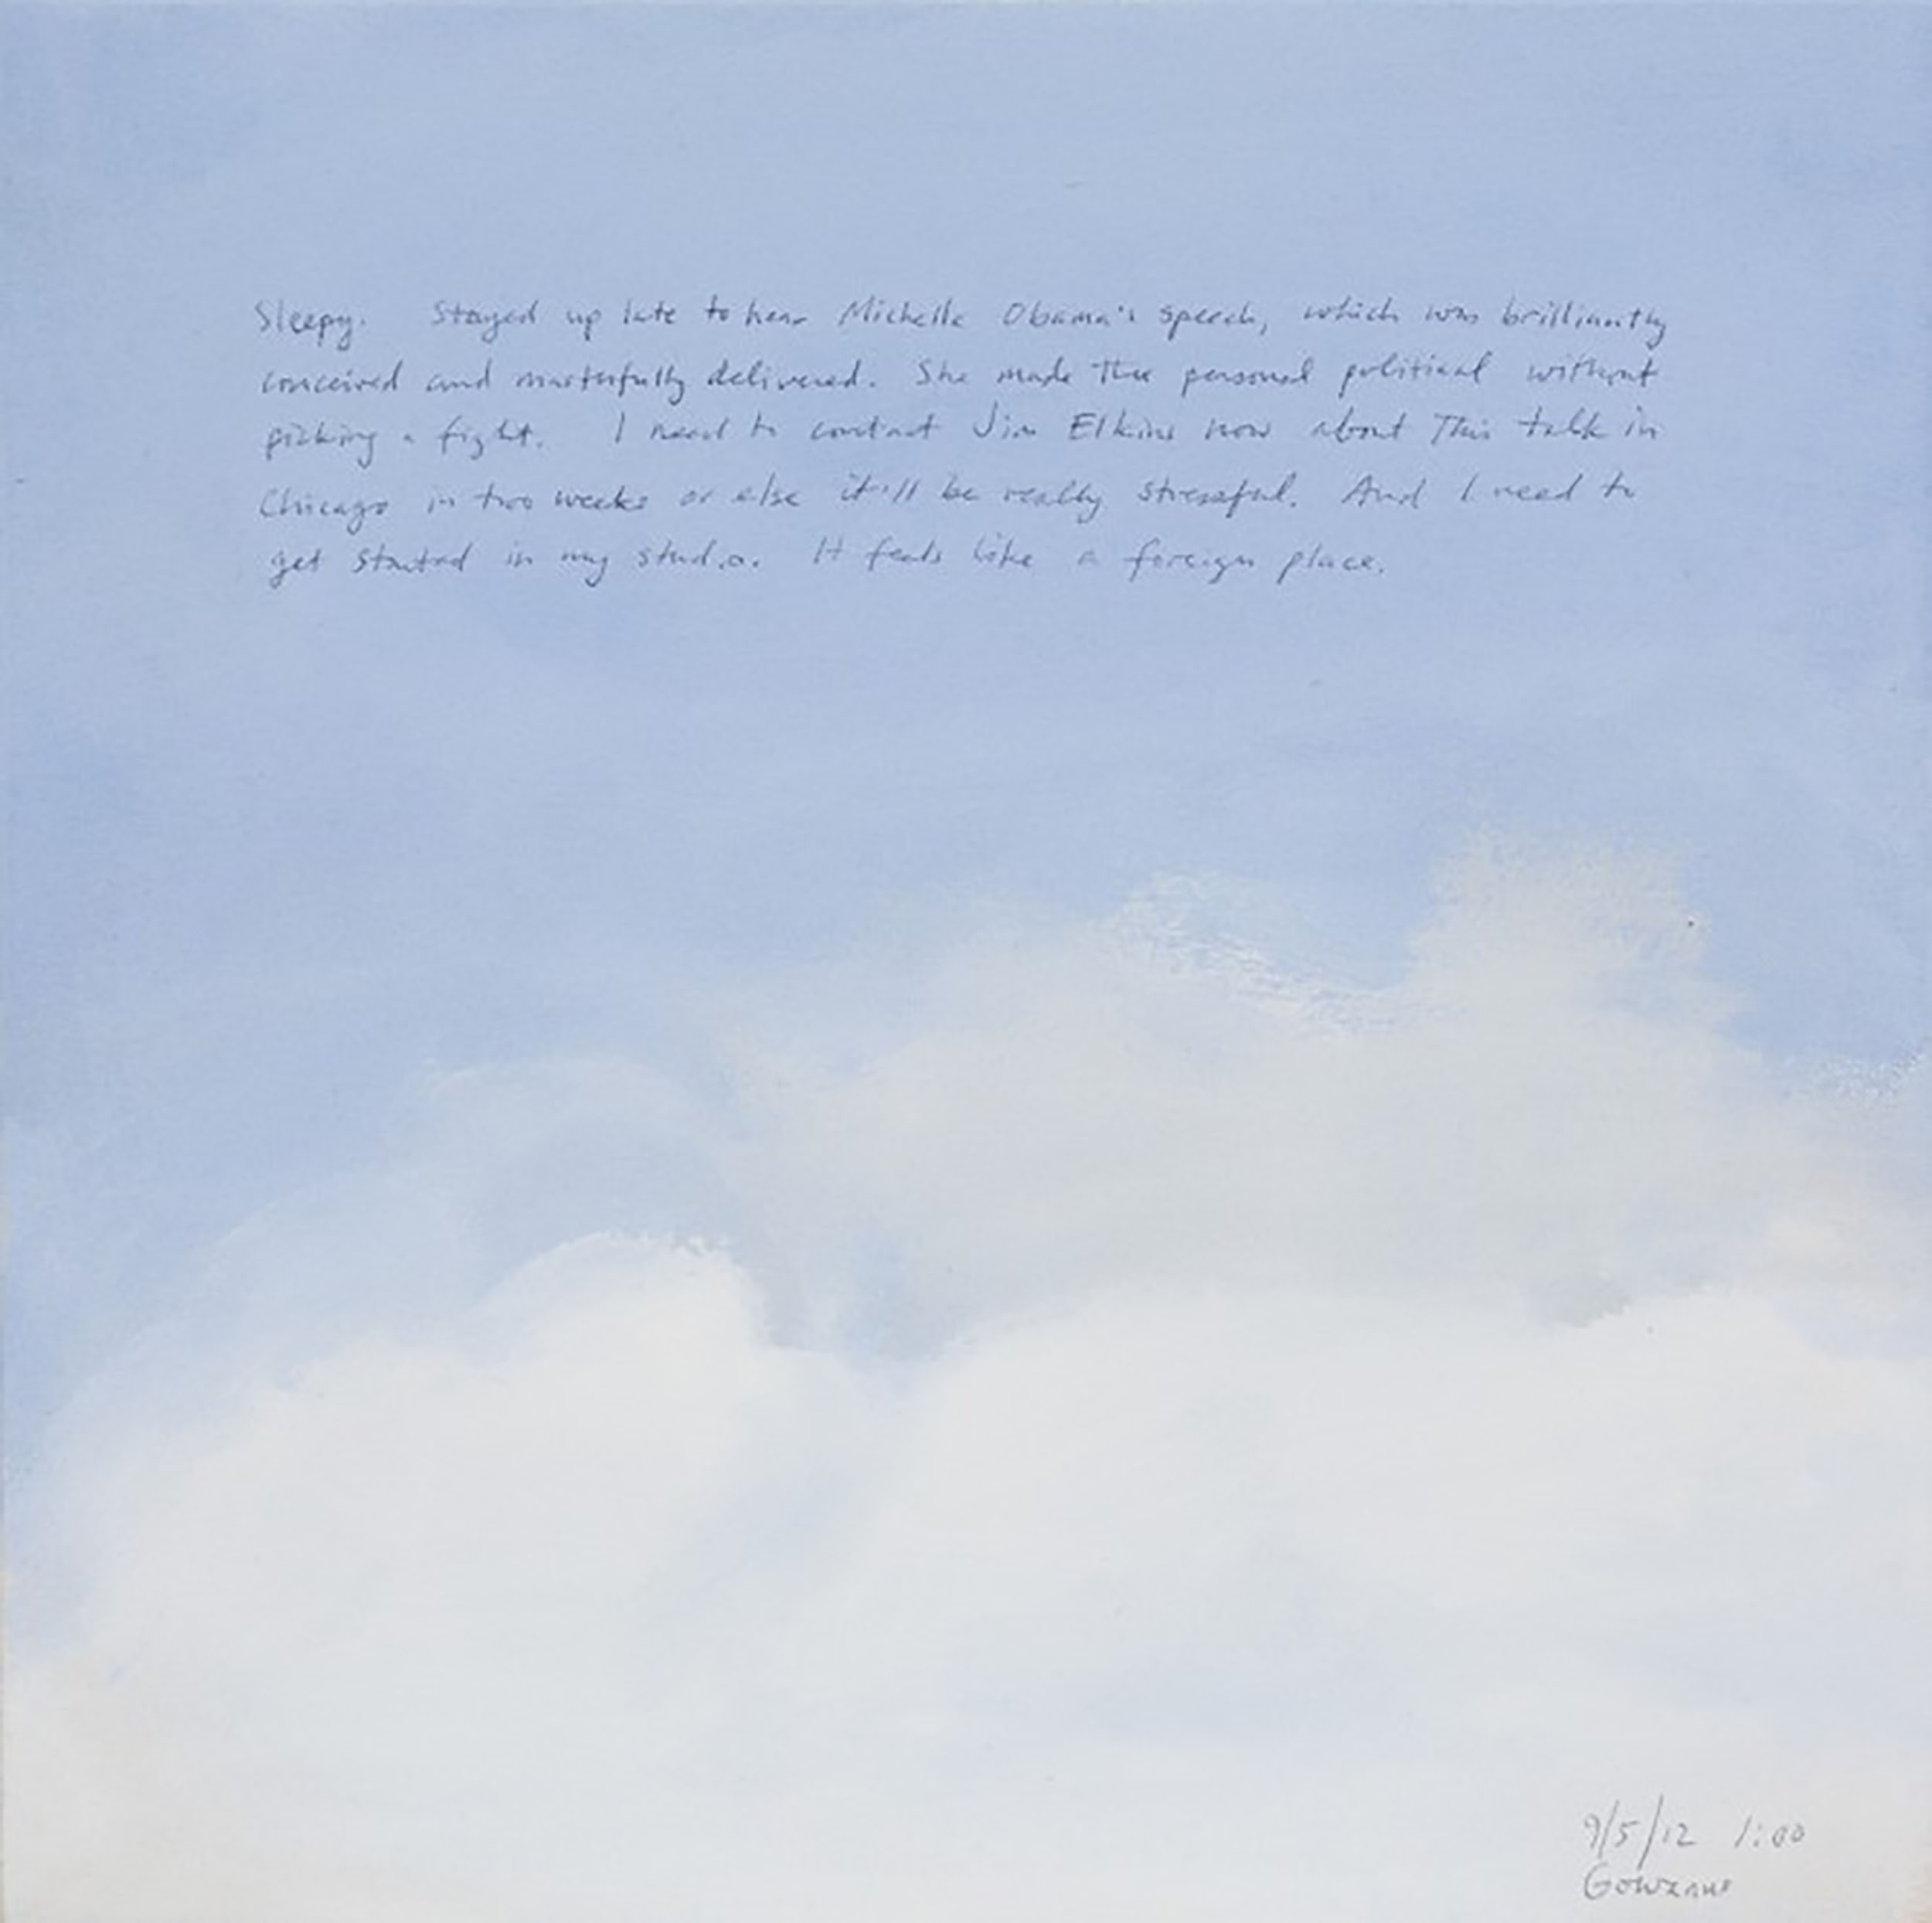 A 14 × 14 inch, acrylic painting of the sky. A journal entry is handwritten on the painting:

“Sleepy. Stayed up late to hear Michelle Obama’s speech, which was brilliantly conceived and masterfully delivered. She made the personal political without picking a fight. I need to contact Jim Elkins now about this talk in Chicago in two weeks or else it’ll be really stressful. And I need to get started in my studio. It feels like a foreign place.

9/5/12 1:00
Gowanus”